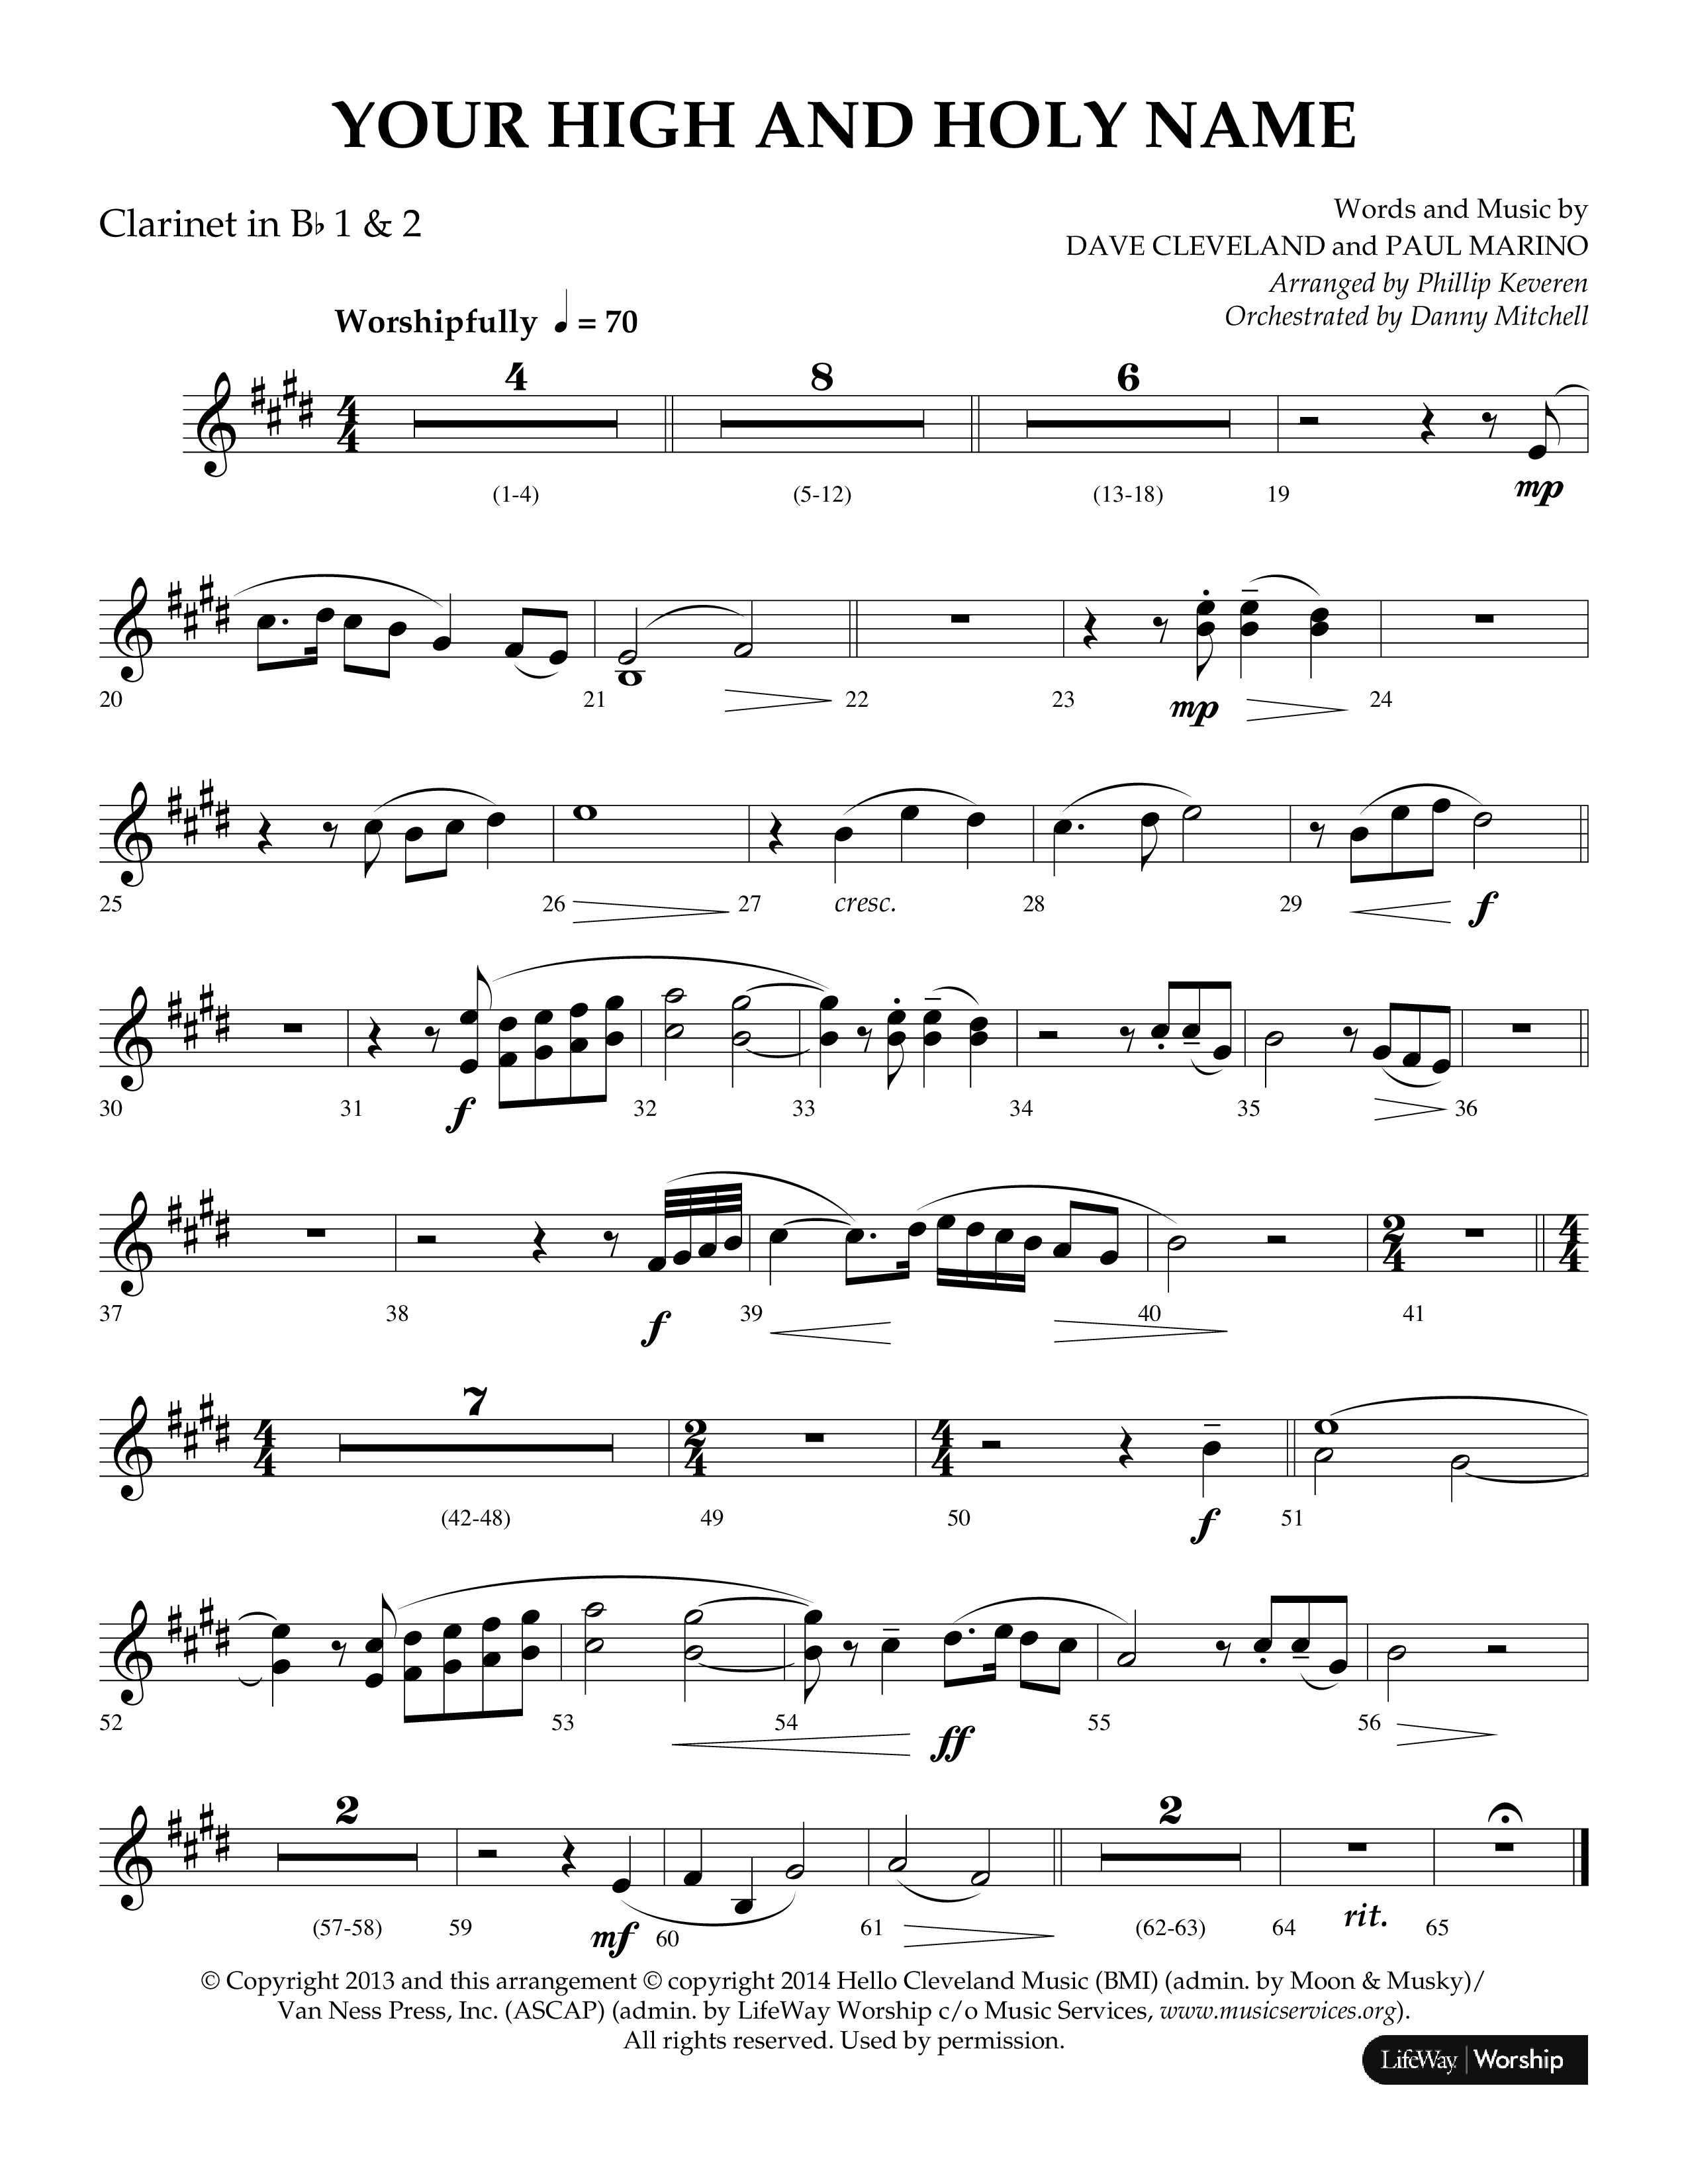 Your High And Holy Name (Choral Anthem SATB) Clarinet 1/2 (Lifeway Choral / Arr. Phillip Keveren / Orch. Danny Mitchell)